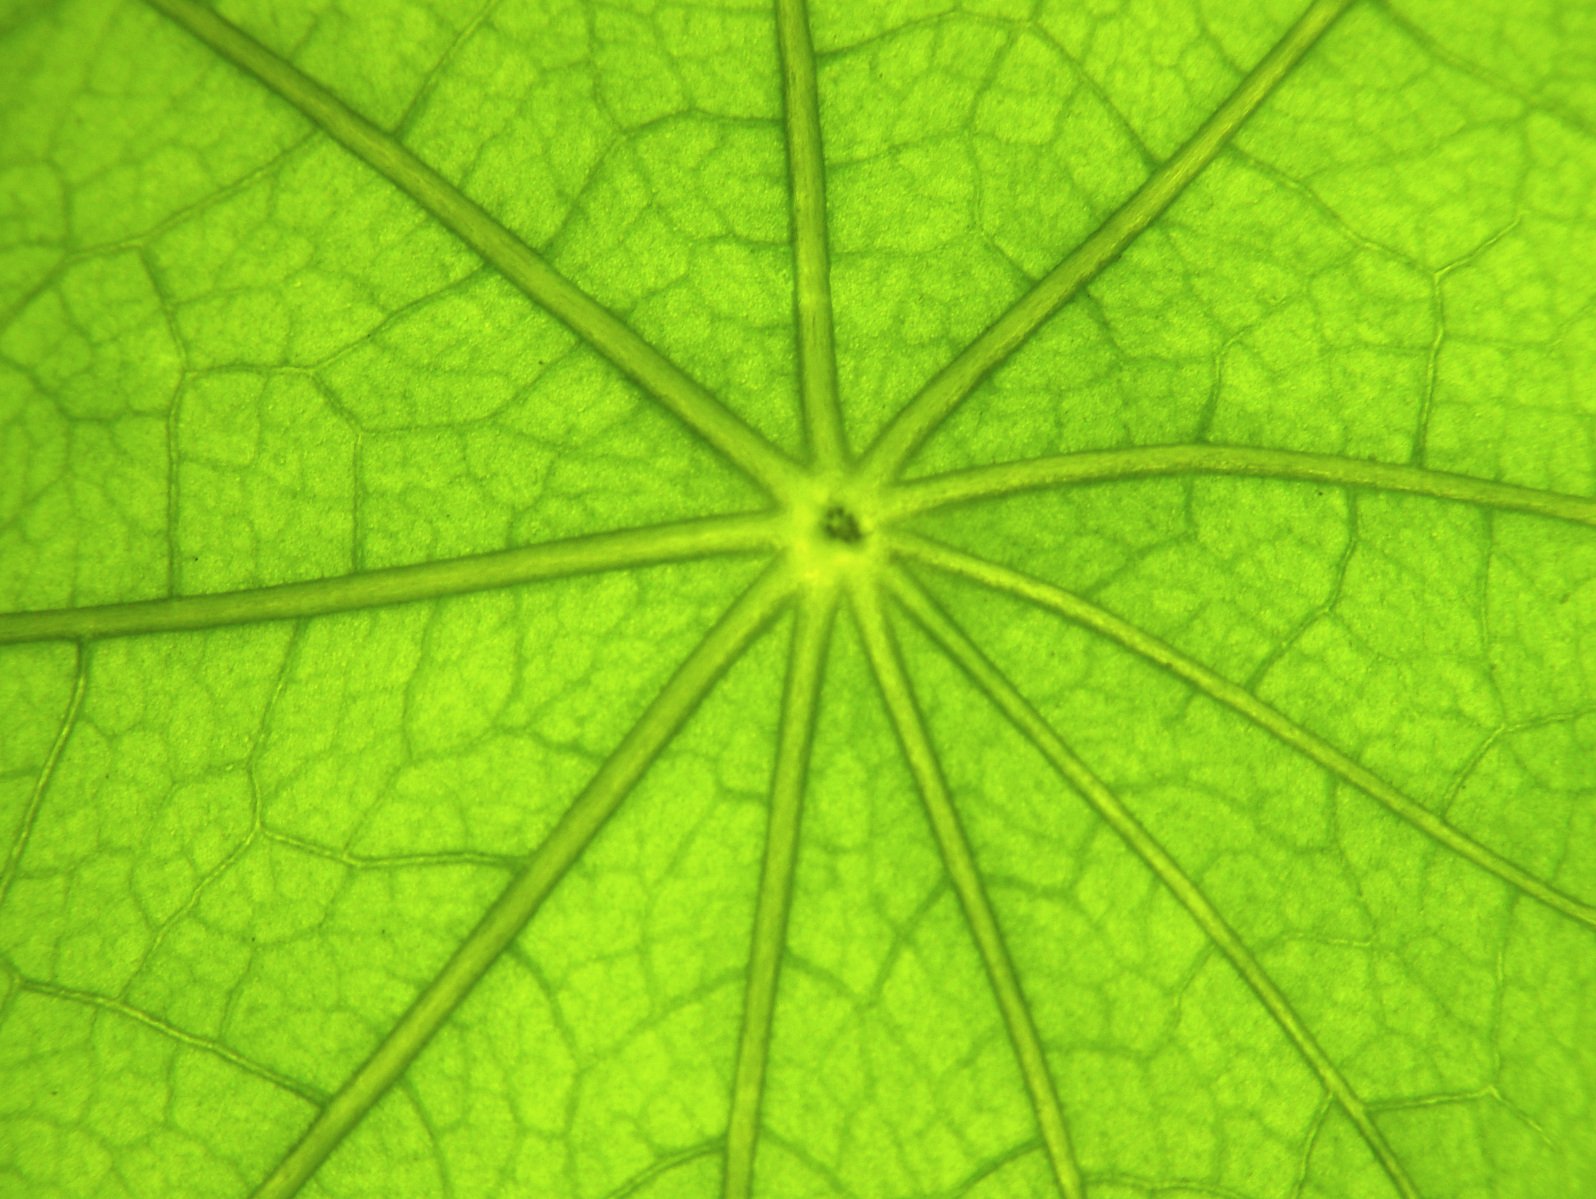 a very close up view of a green leaf